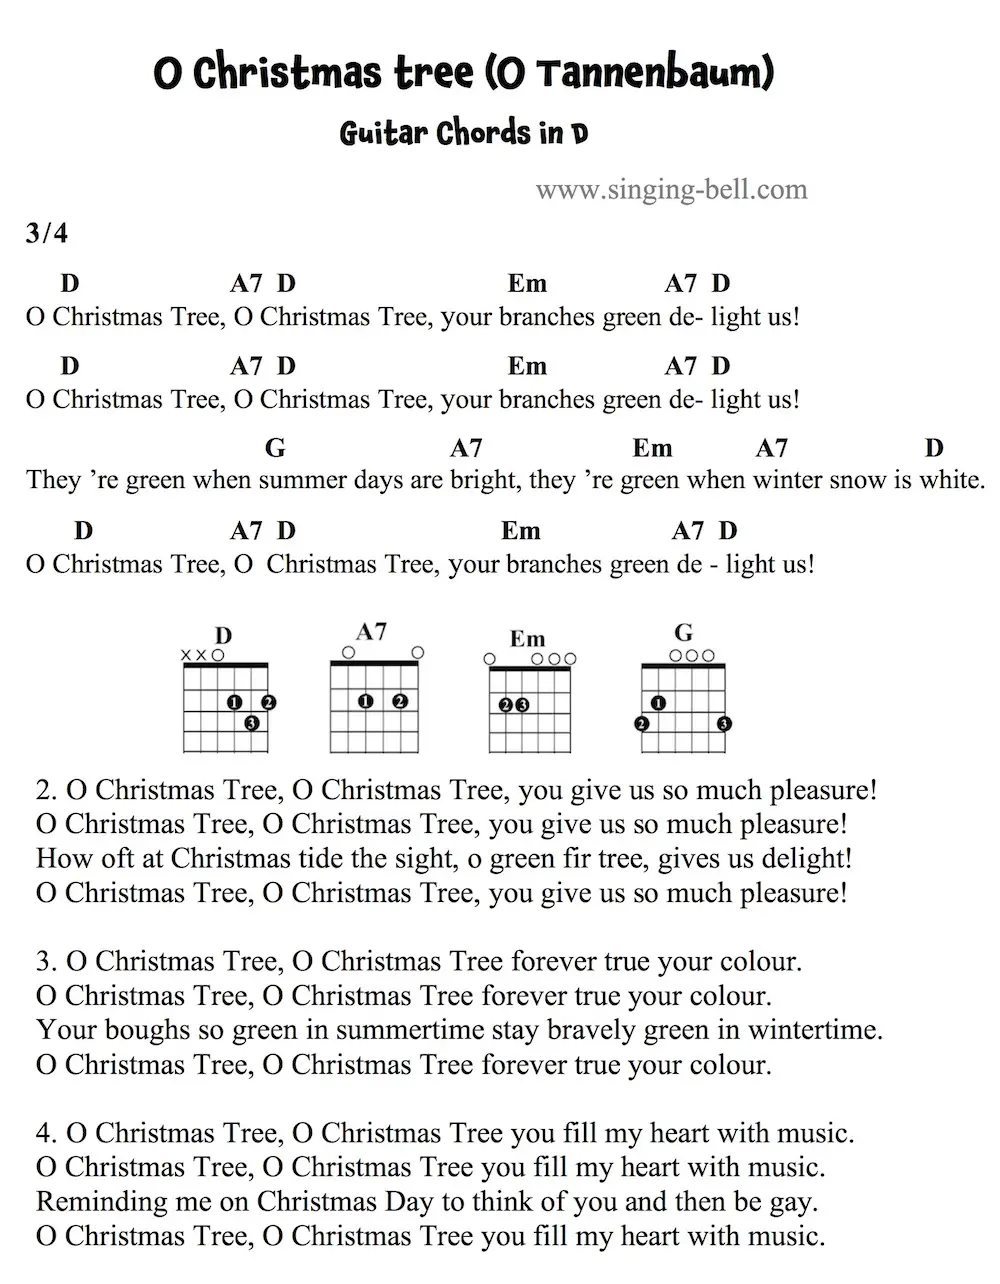 O Christmas Tree Guitar Chords and Tabs in D.